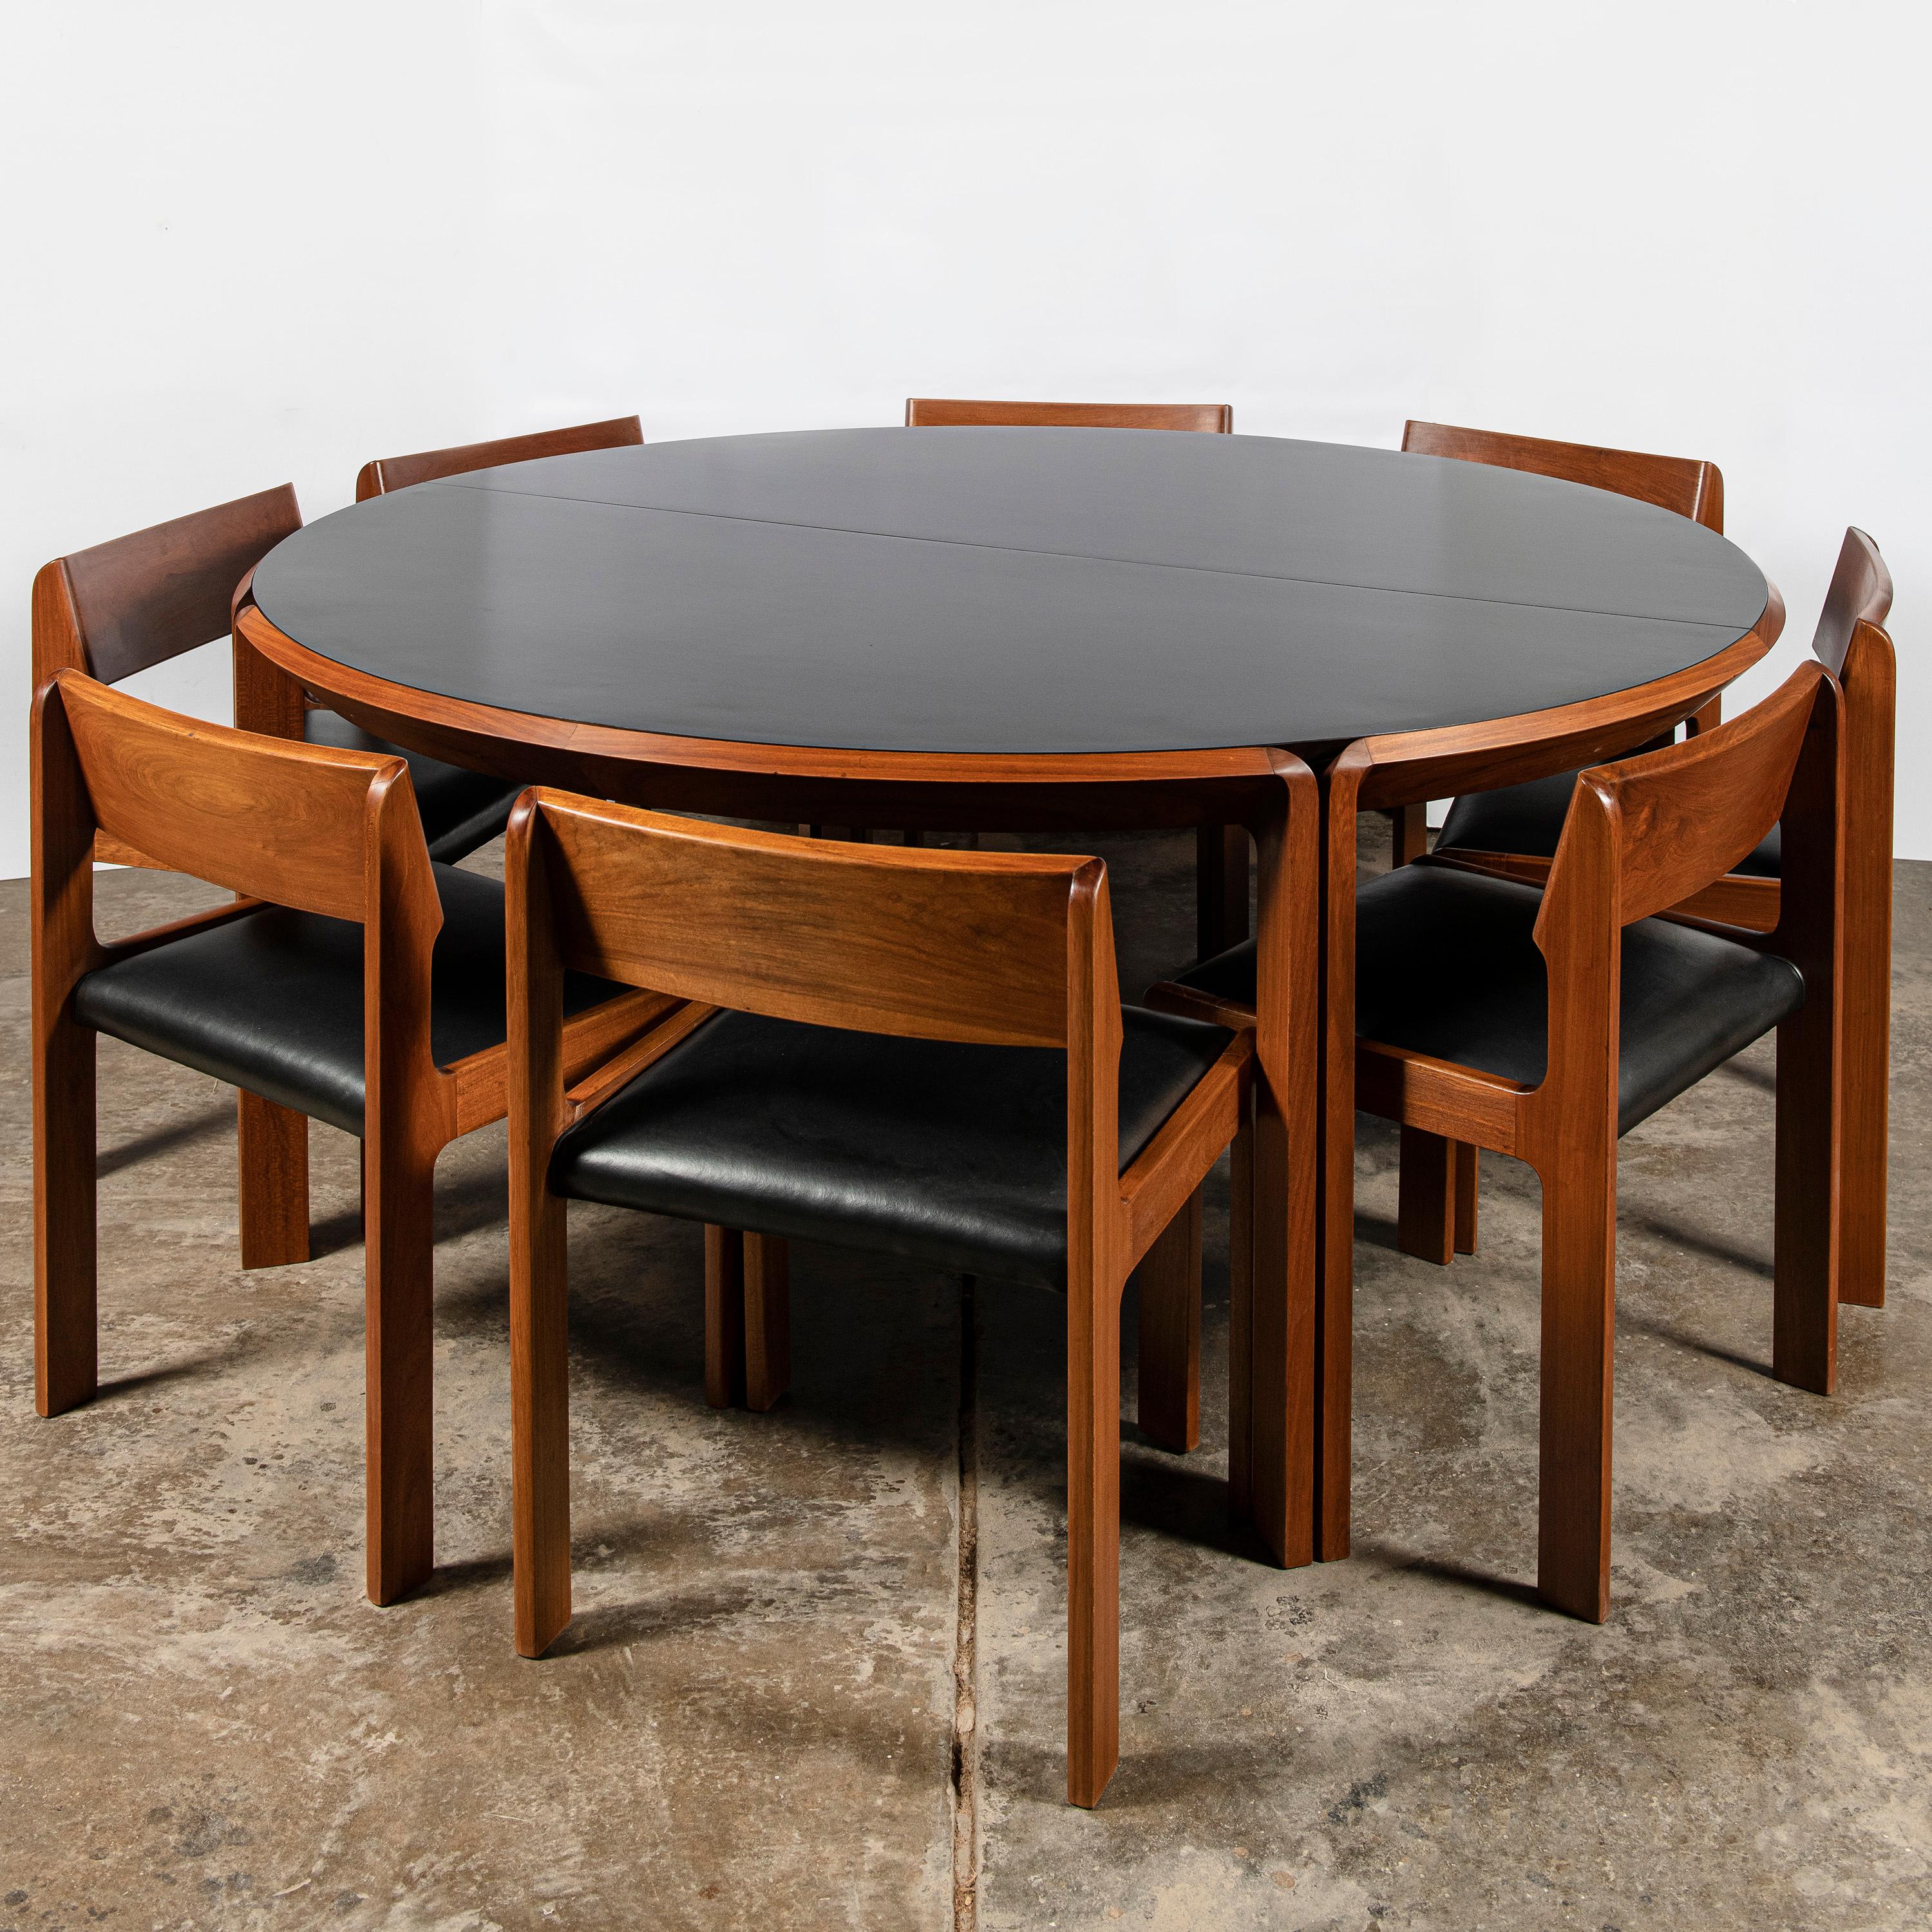 Wood, leather and formica dining room set for 10 people by Churba. Argentina, Buenos Aires, 1970.
One wood and formica large table with extension and ten wood and leather chairs.

Table dimensions with extension: 72 cm height, 220 cm width, 170 cm